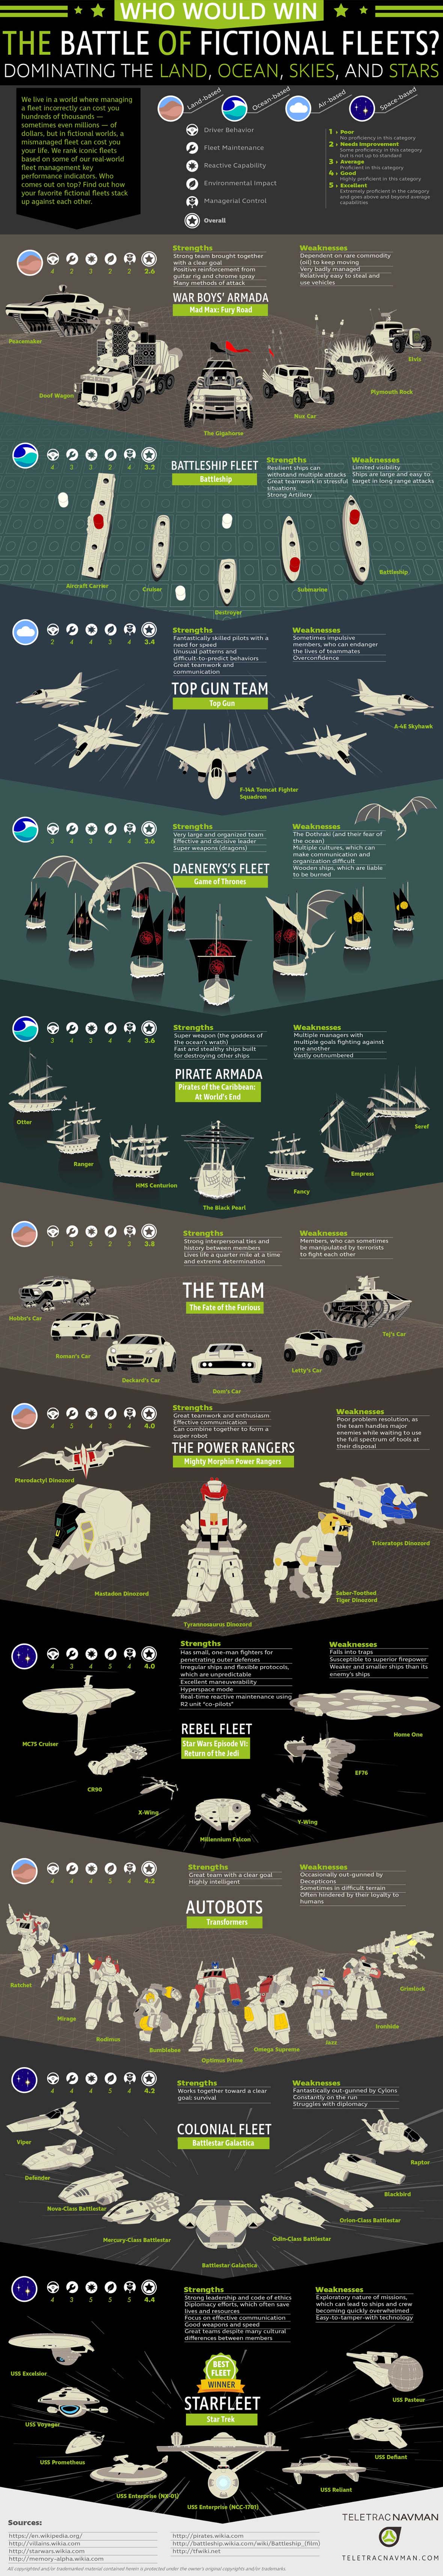 The Battle of the Fictional Fleets